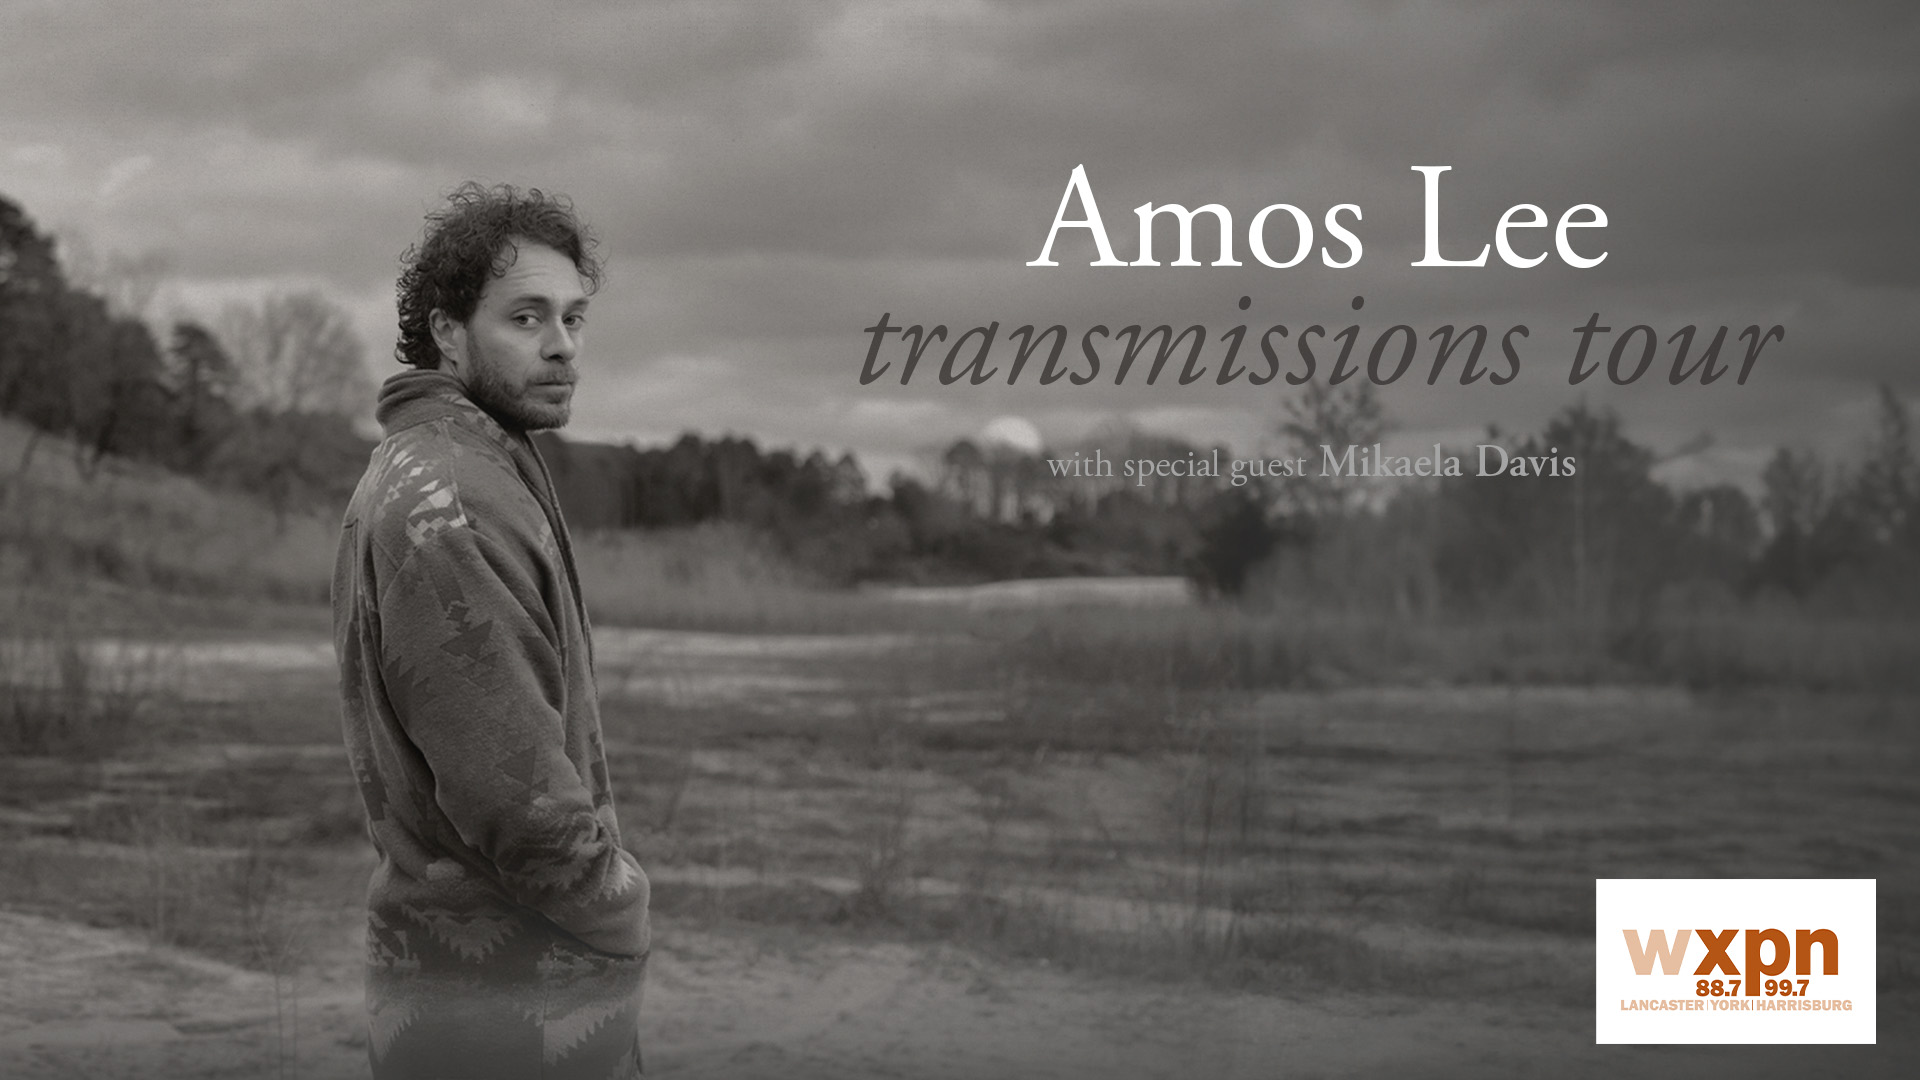 WXPN Welcomes Amos Lee: Transmissions Tour with special guest Mikaela Davis